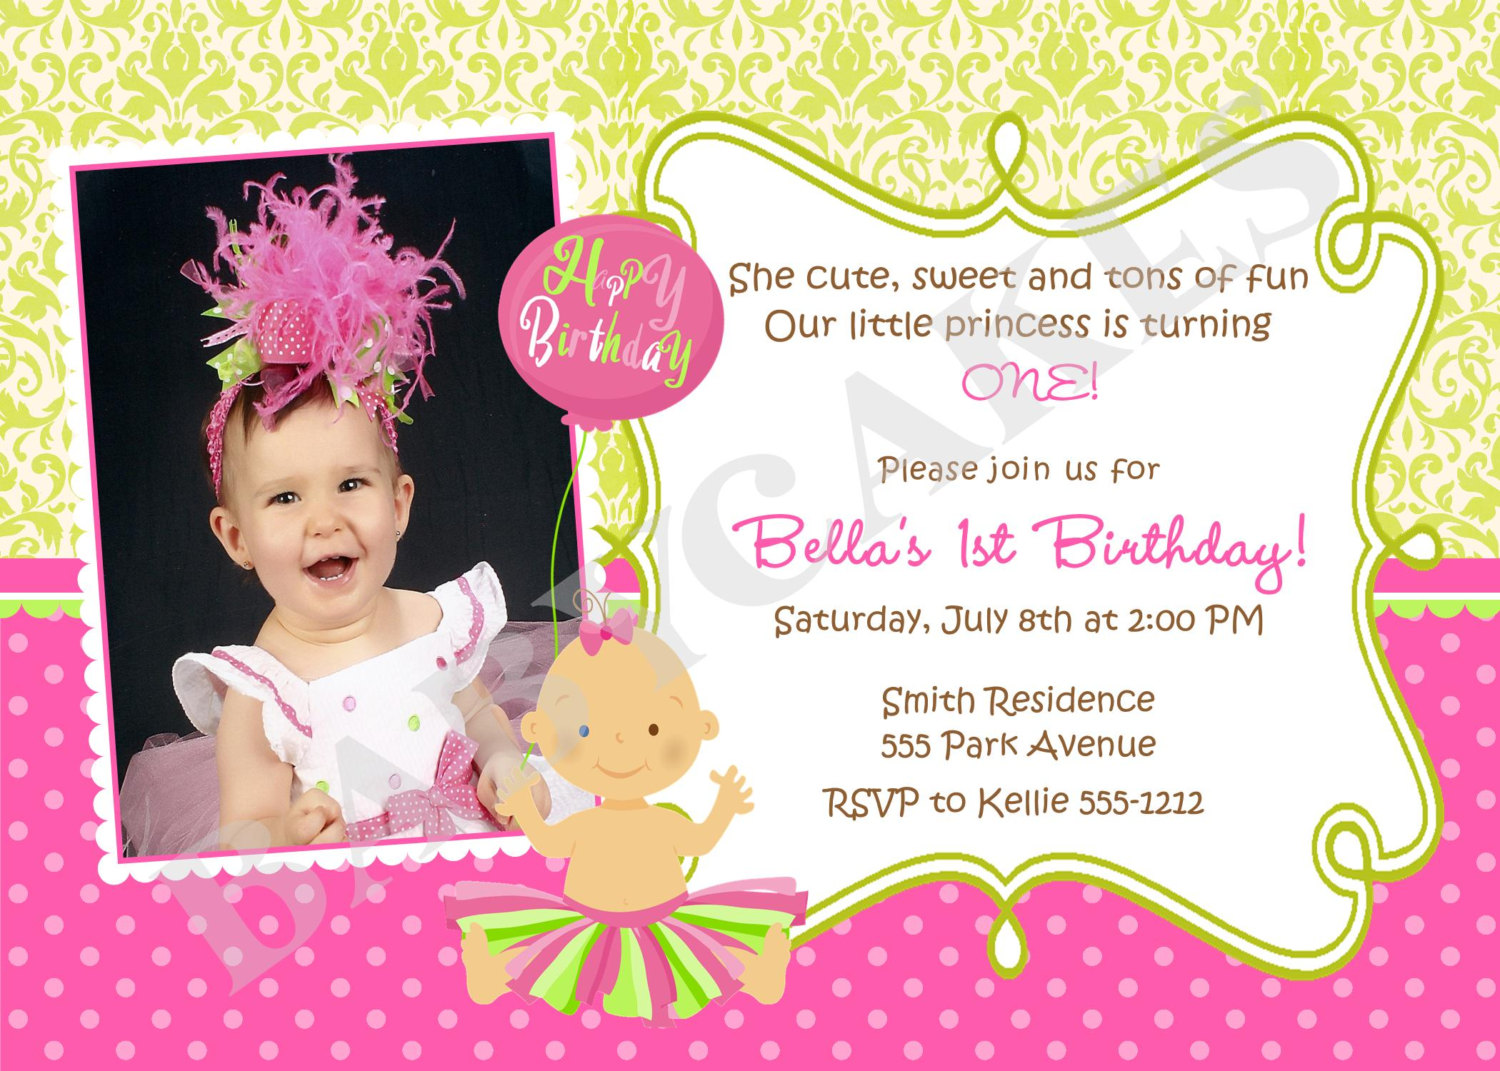 Quotes For 1st Birthday Invitations.